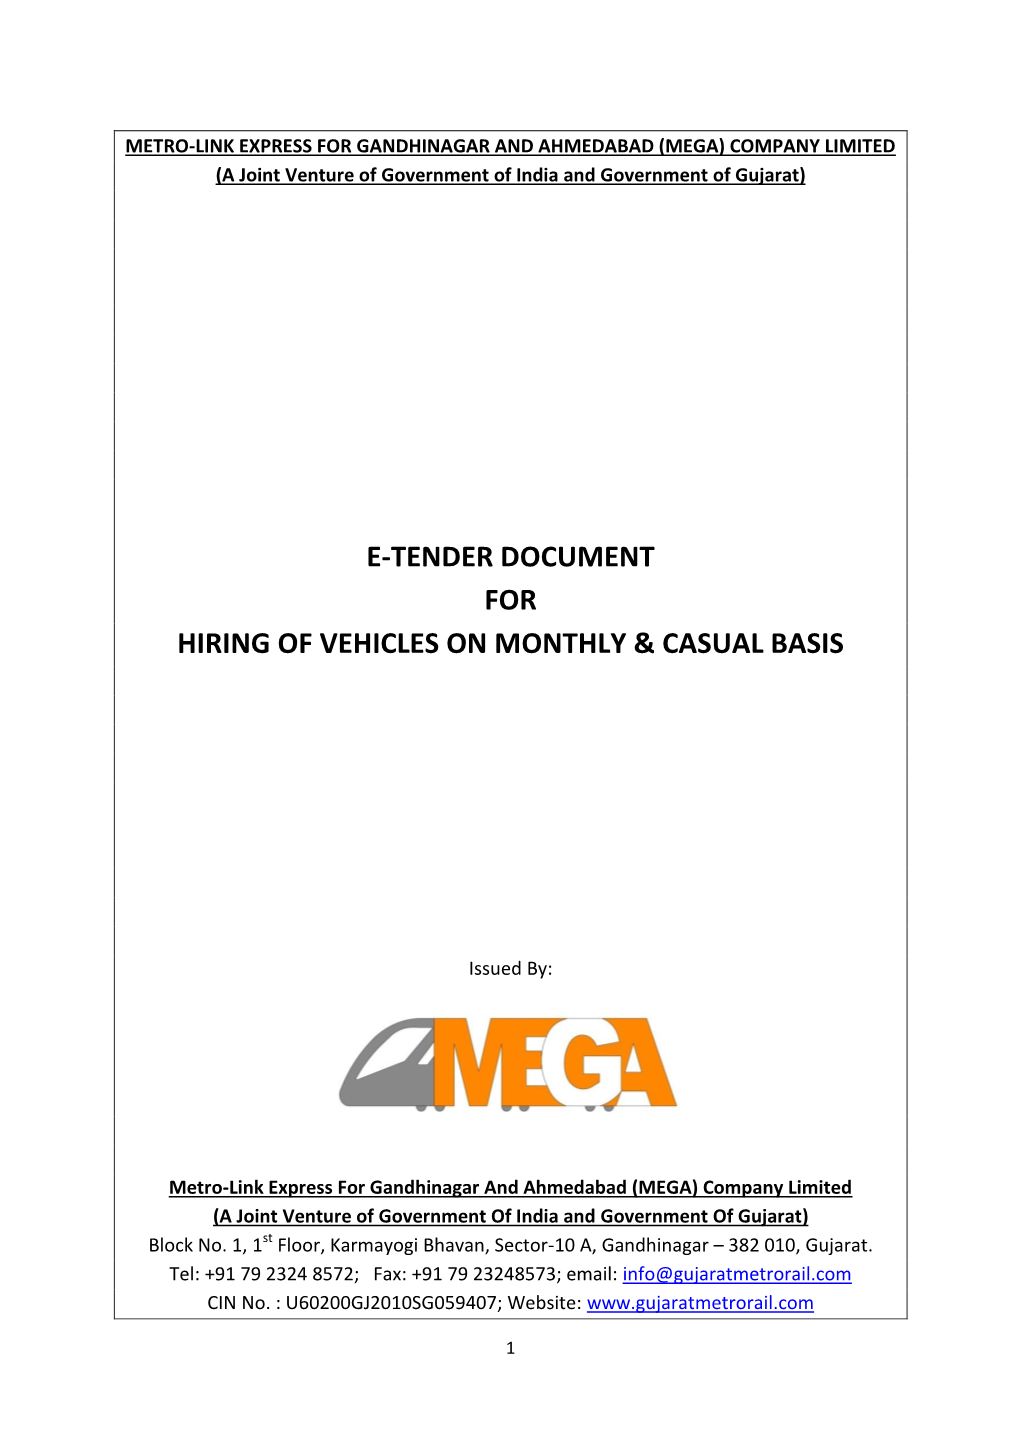 E-Tender Document for Hiring of Vehicles on Monthly & Casual Basis